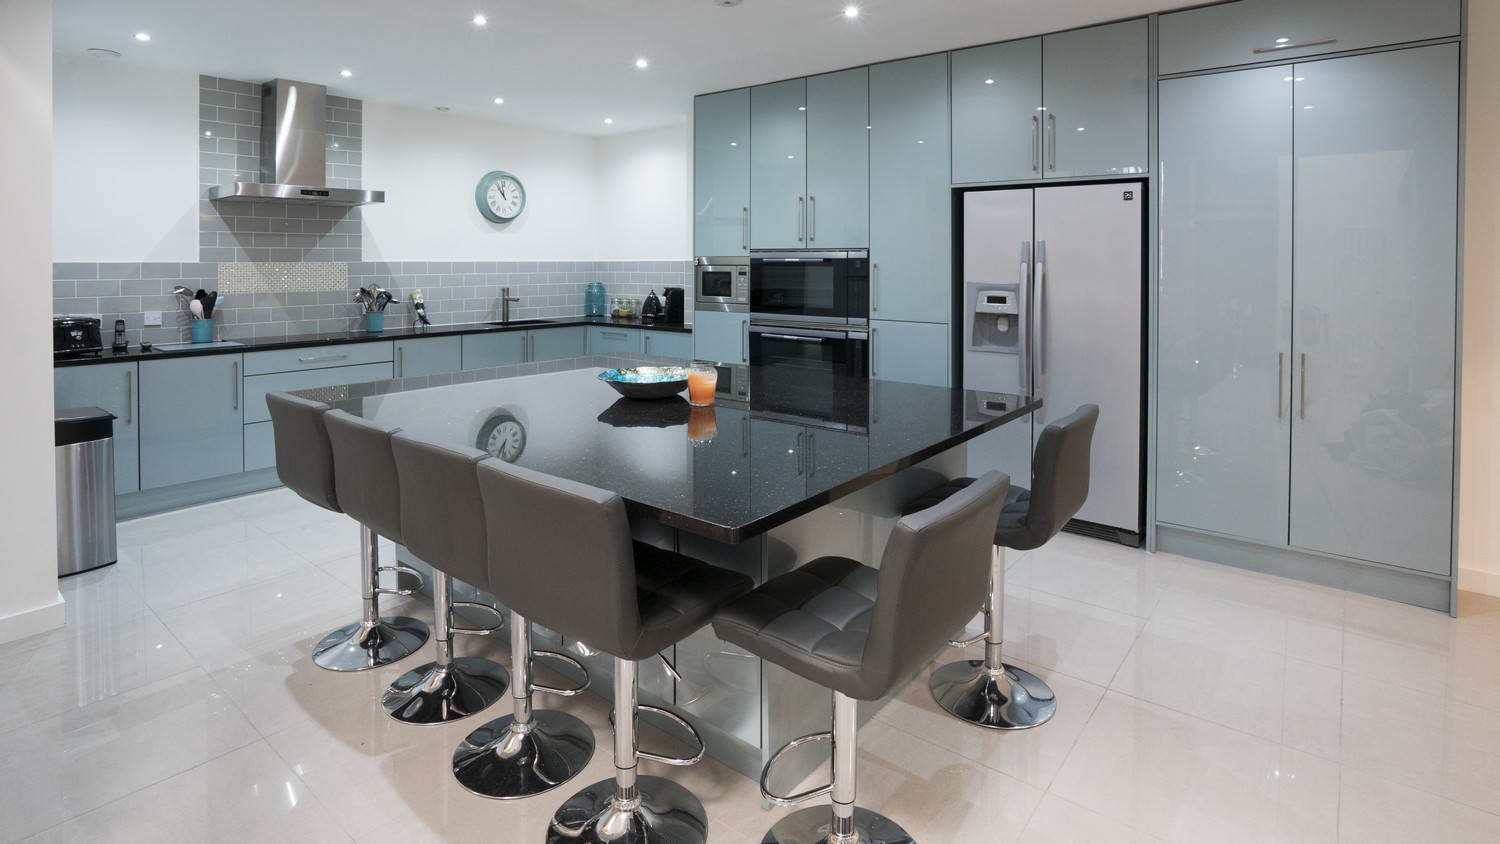 Blue gloss large kitchen with oversized central island with overhang for dining. This kitchen feature black granite work surfaces with lots of storage throughout.